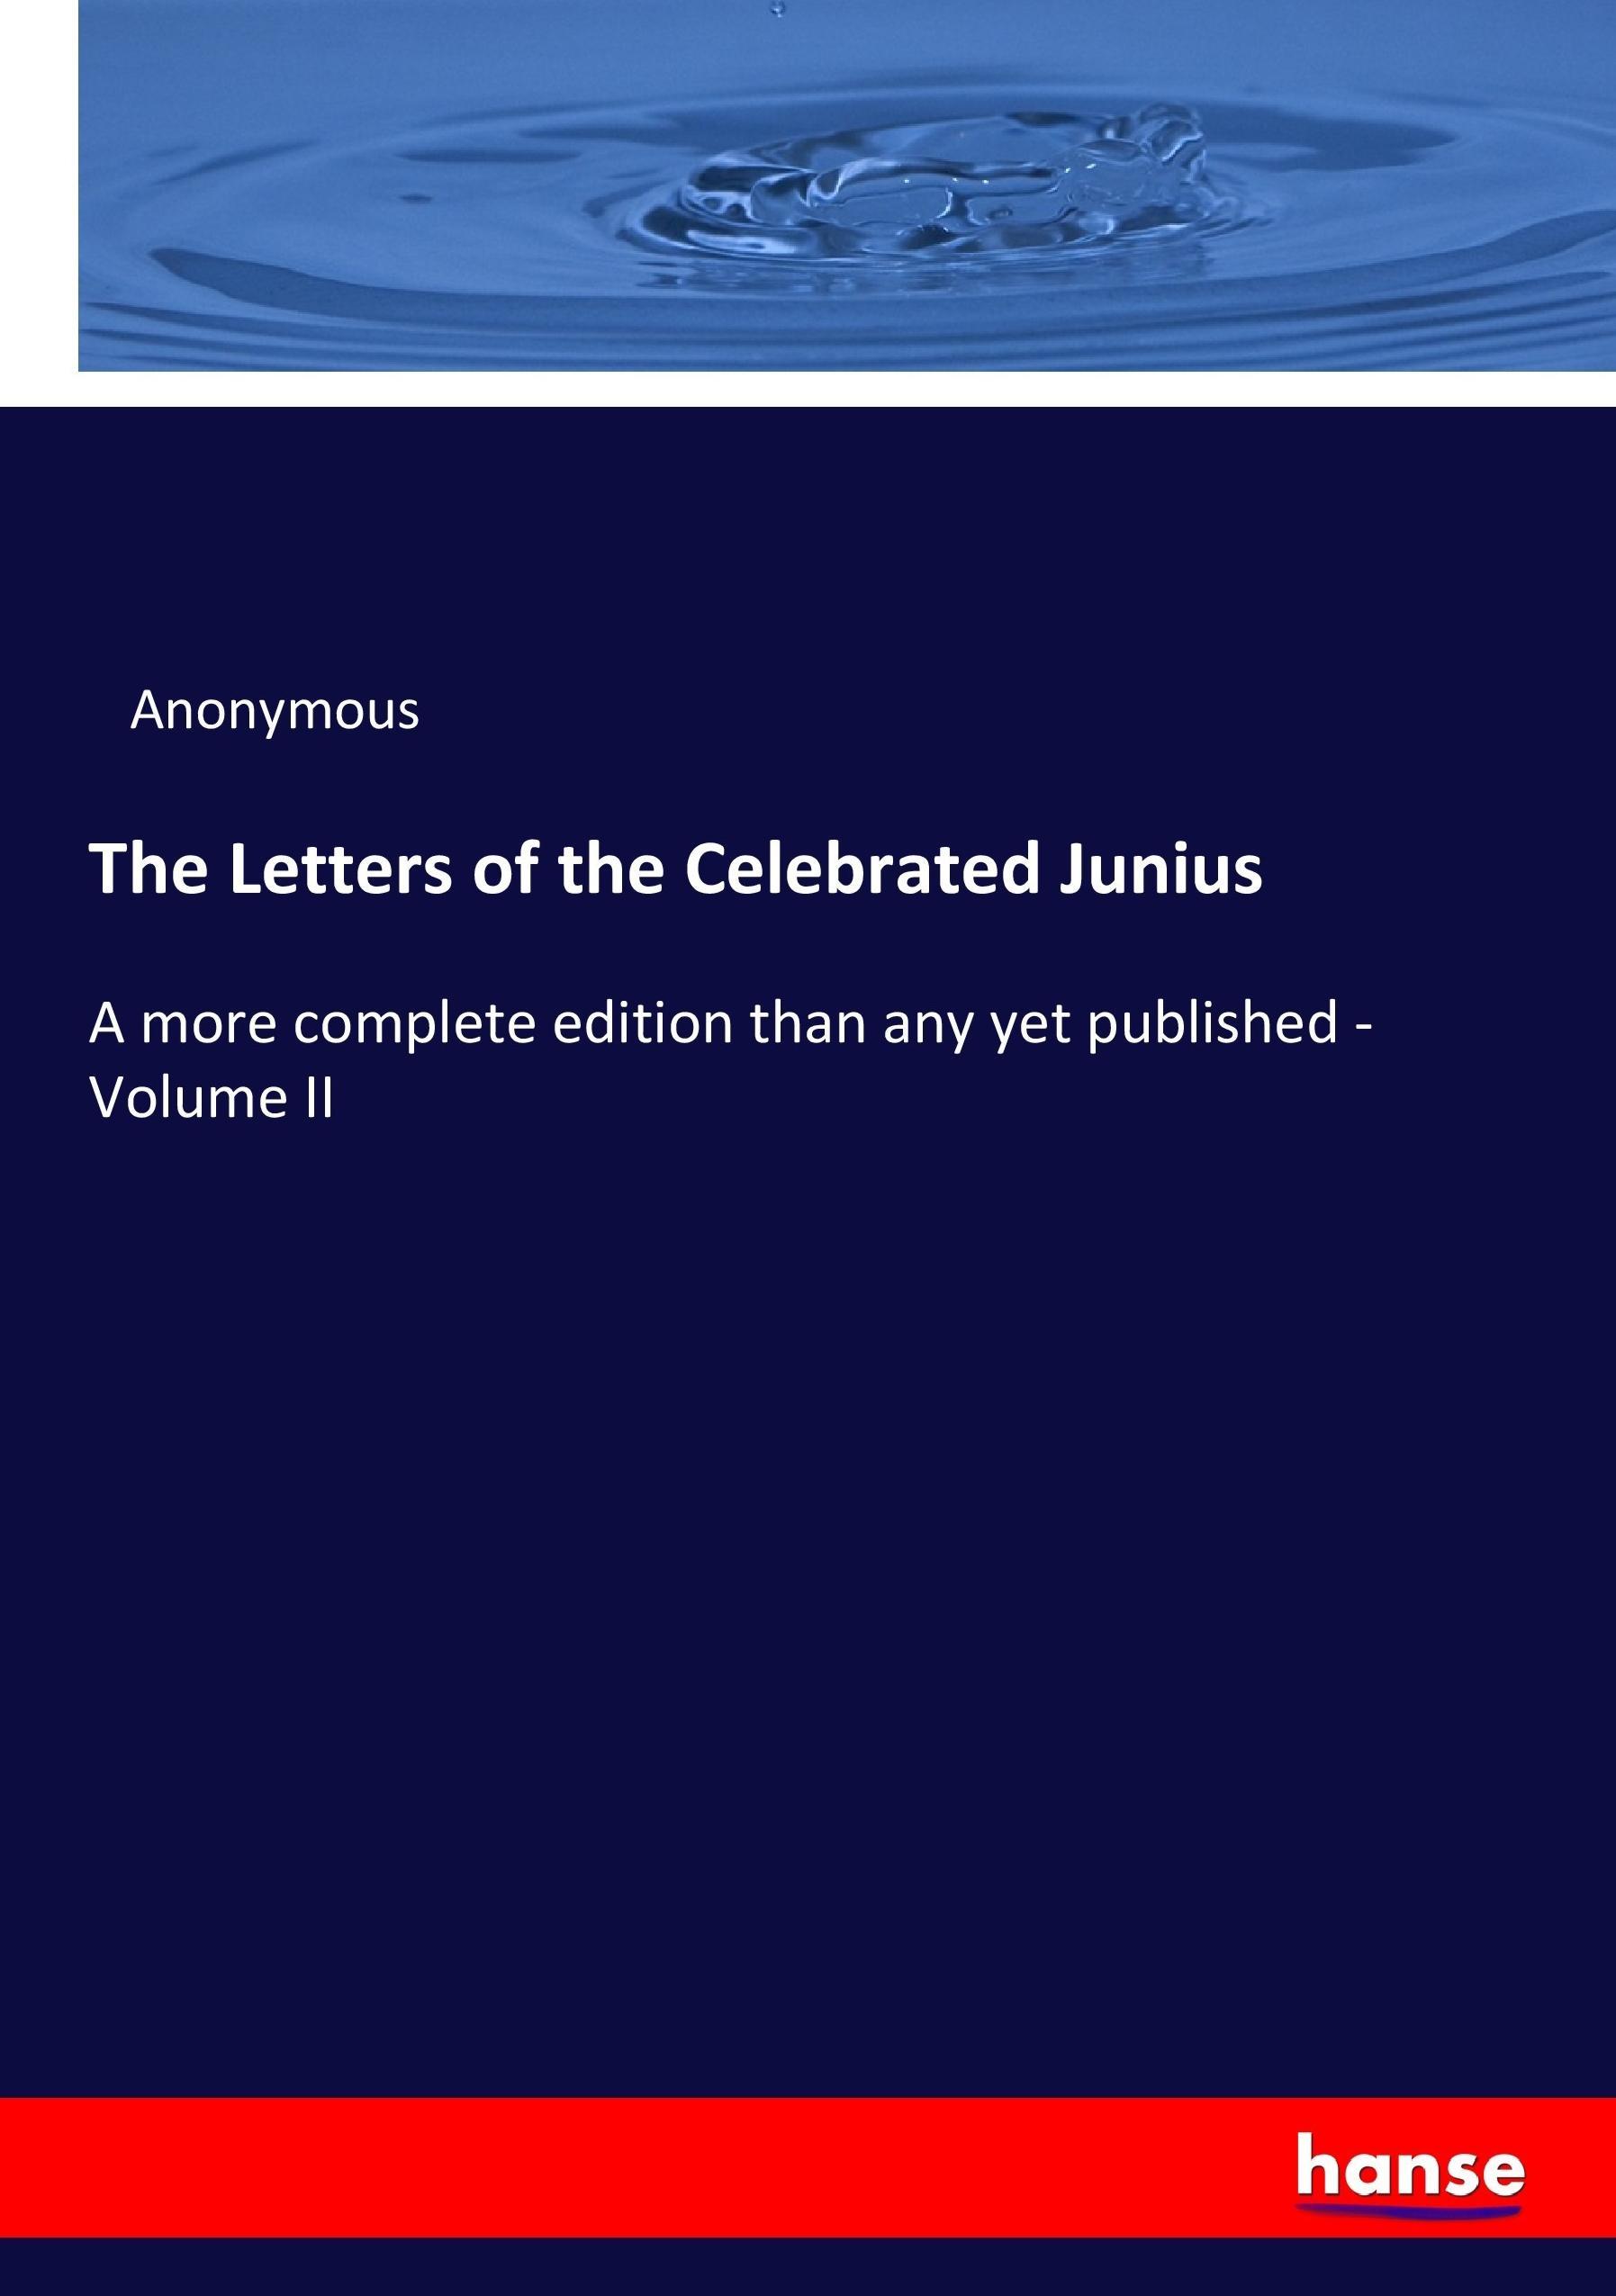 The Letters of the Celebrated Junius - Anonym